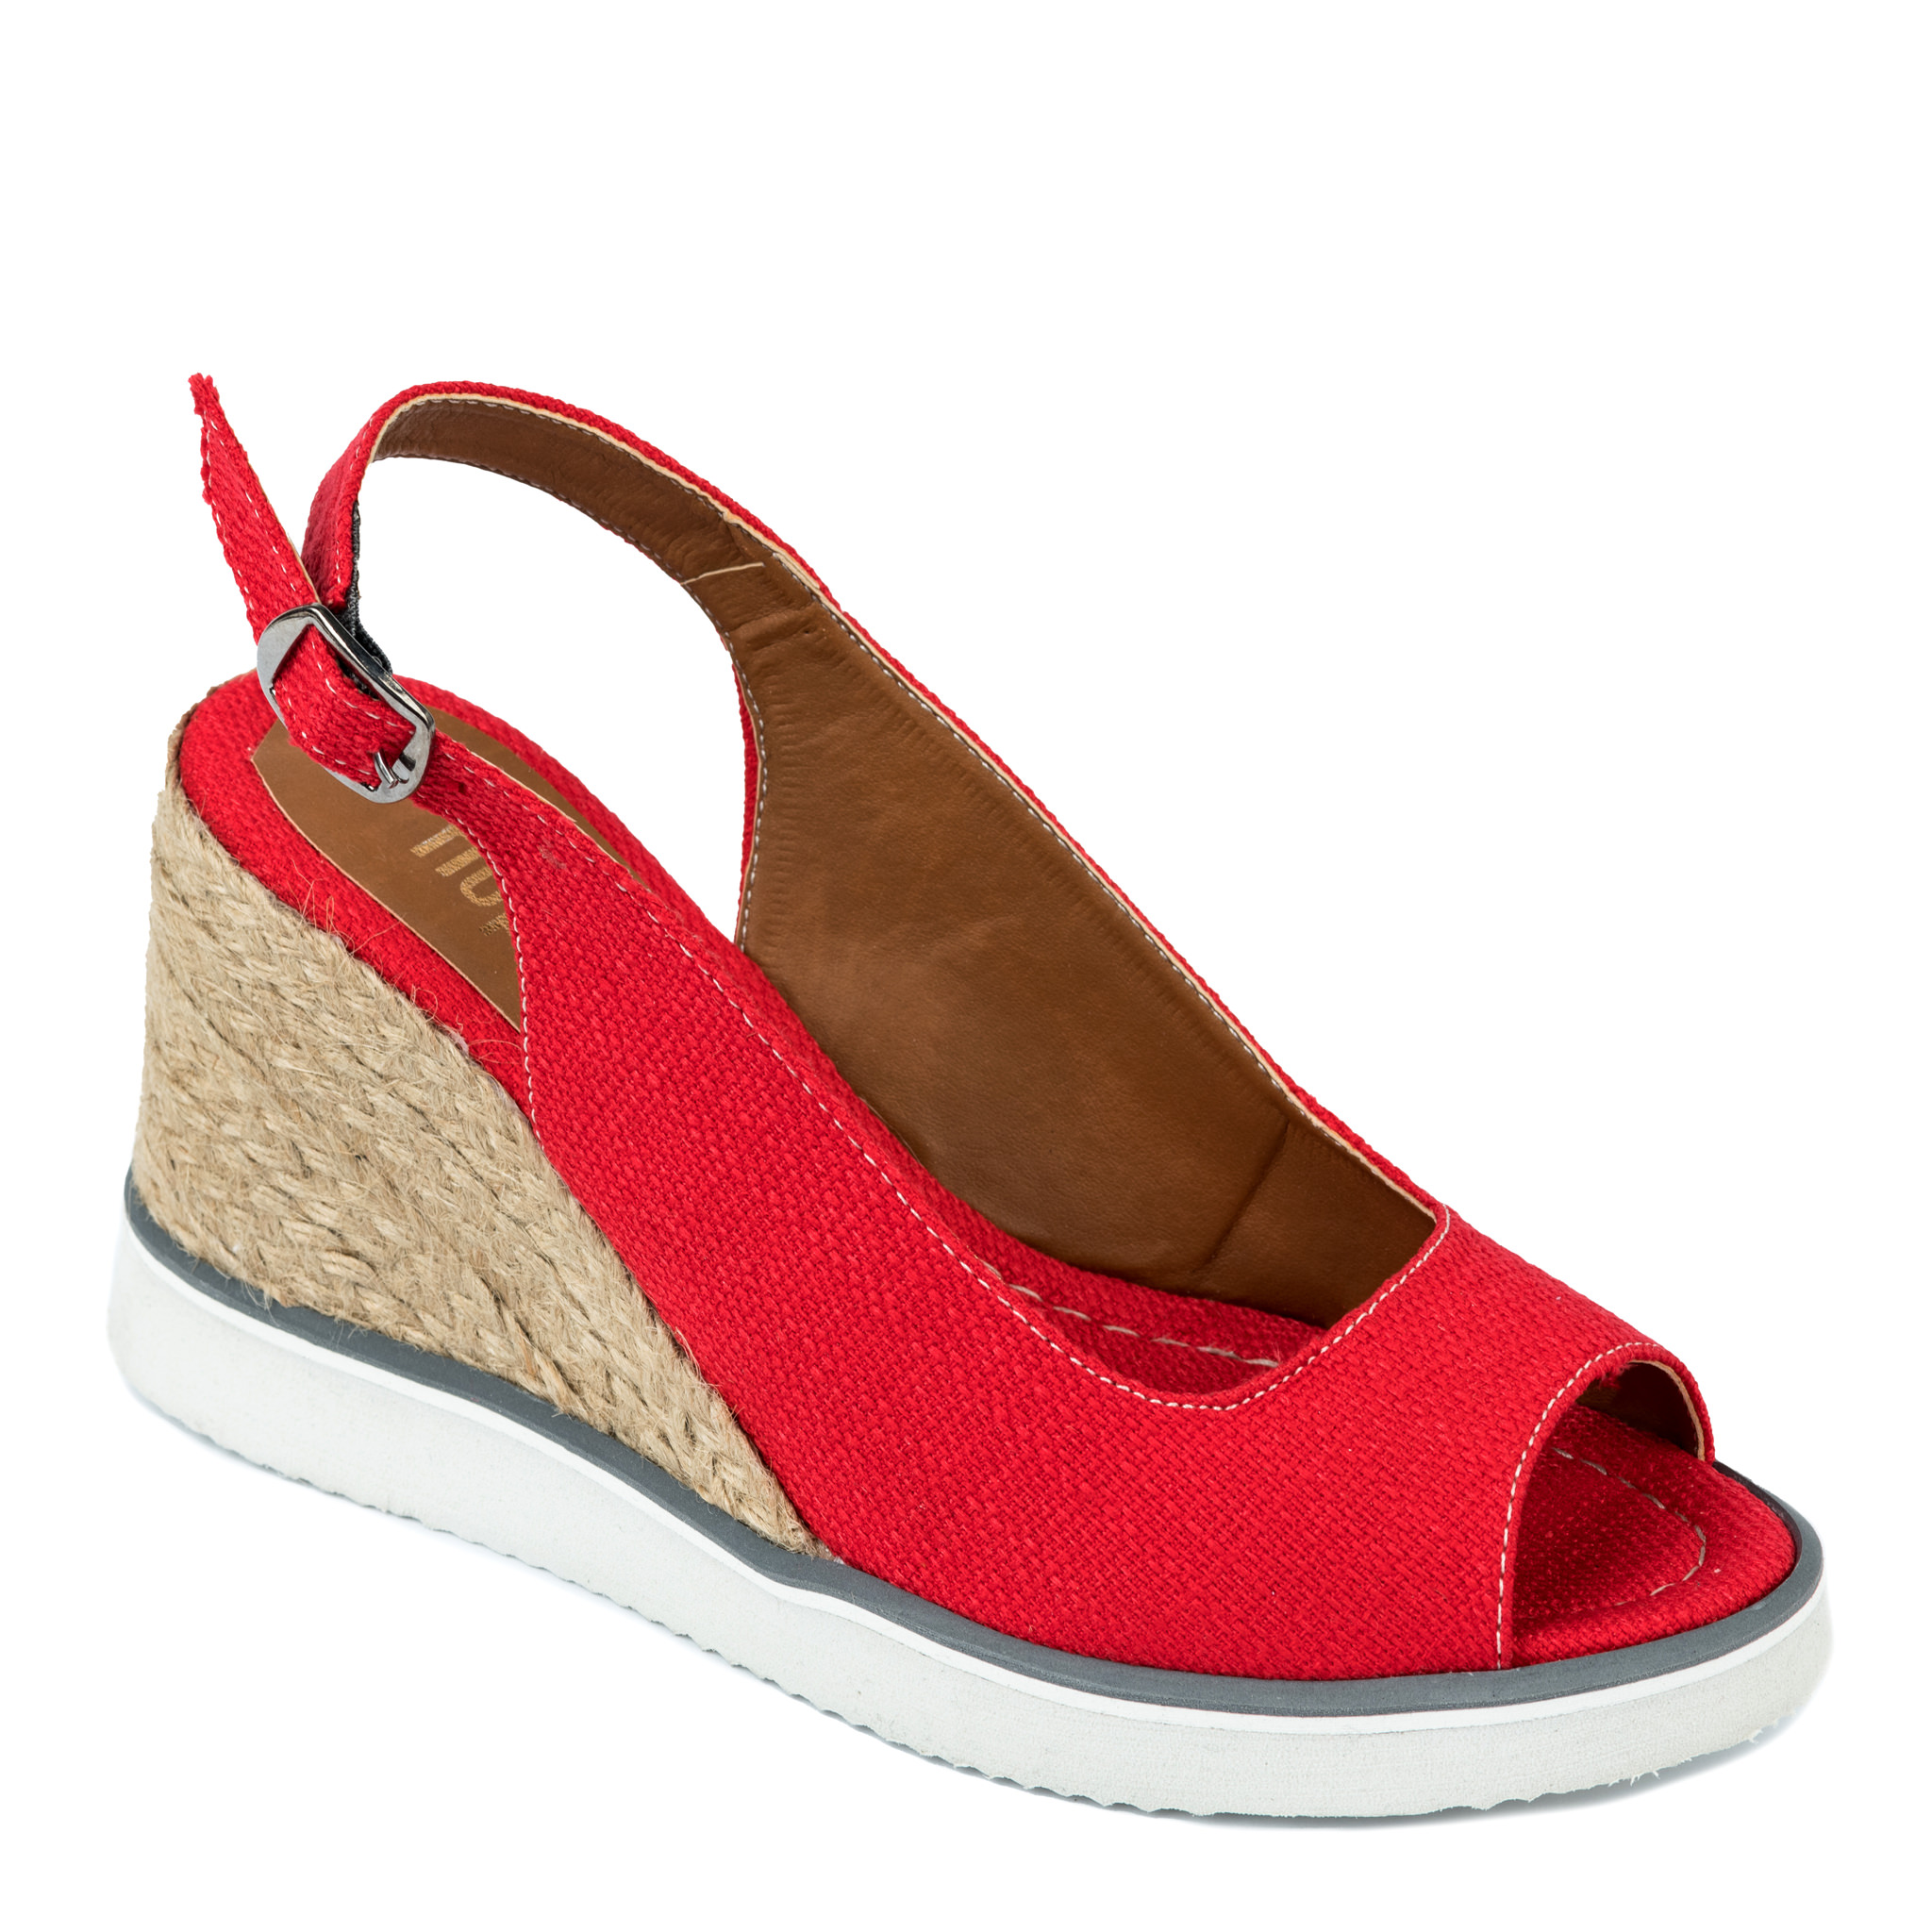 WEDGE SANDALS WITH JUTA - RED